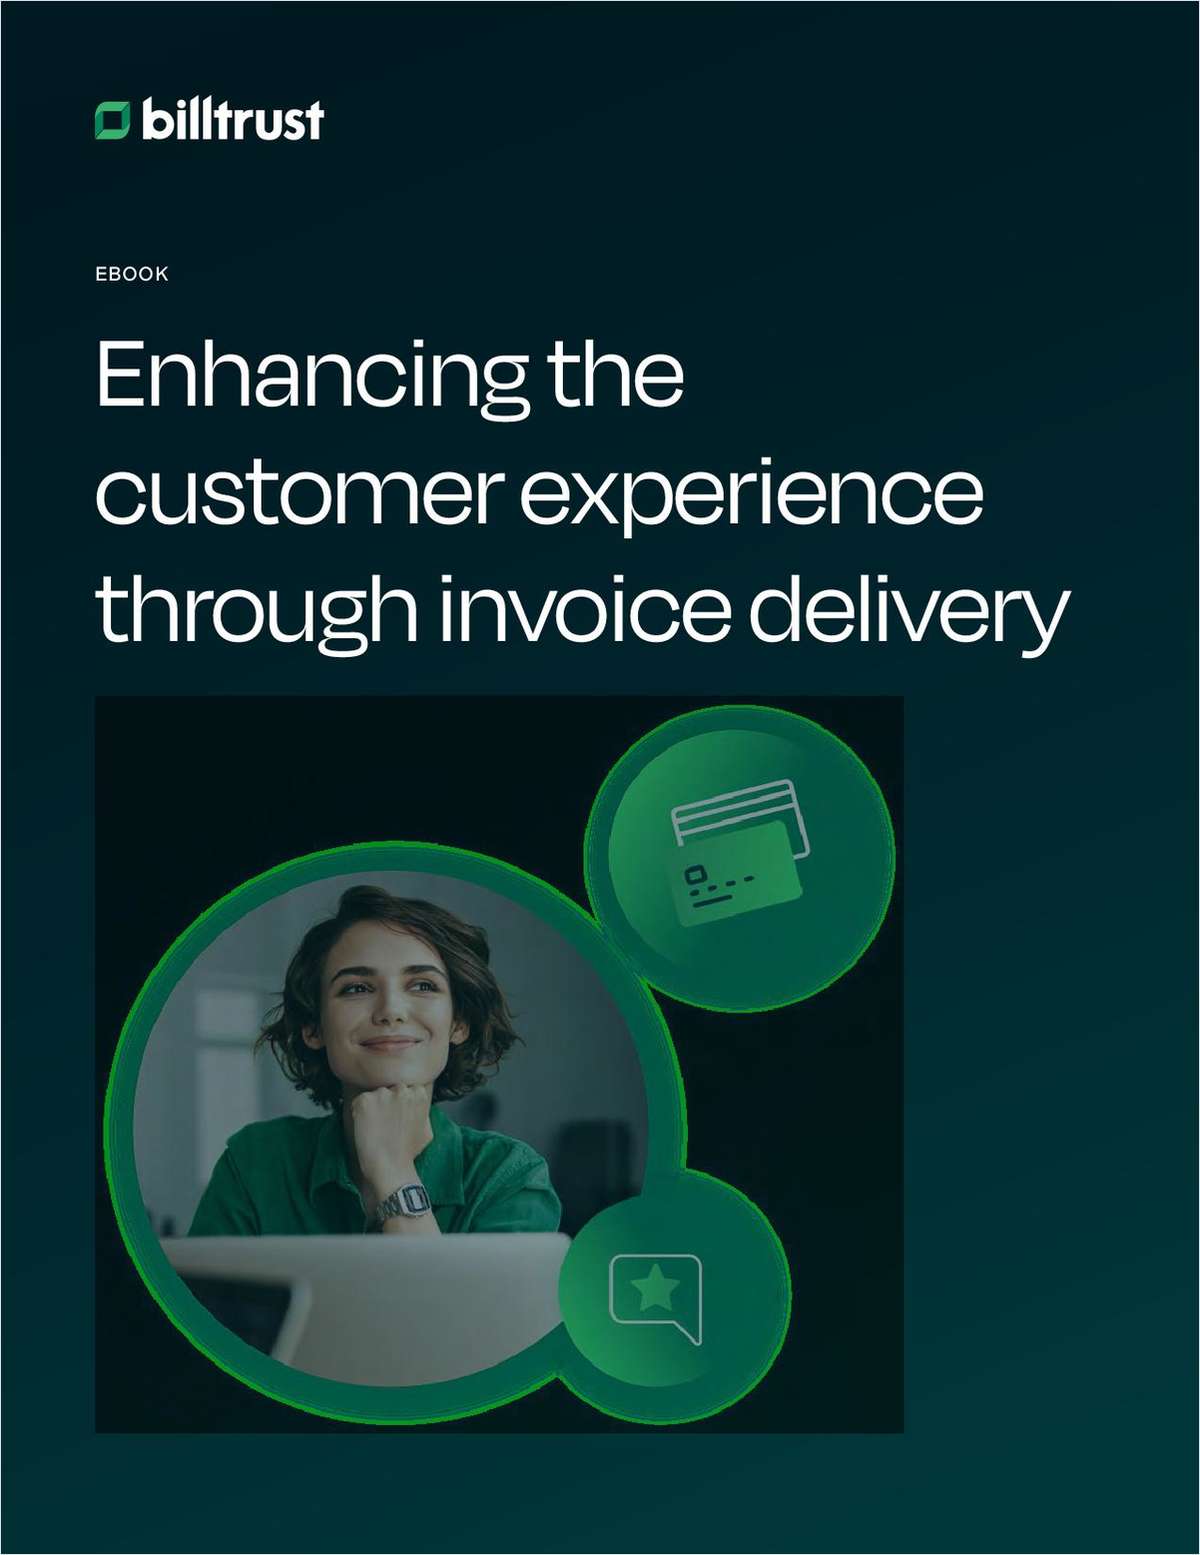 Enhancing the customer experience through invoice delivery